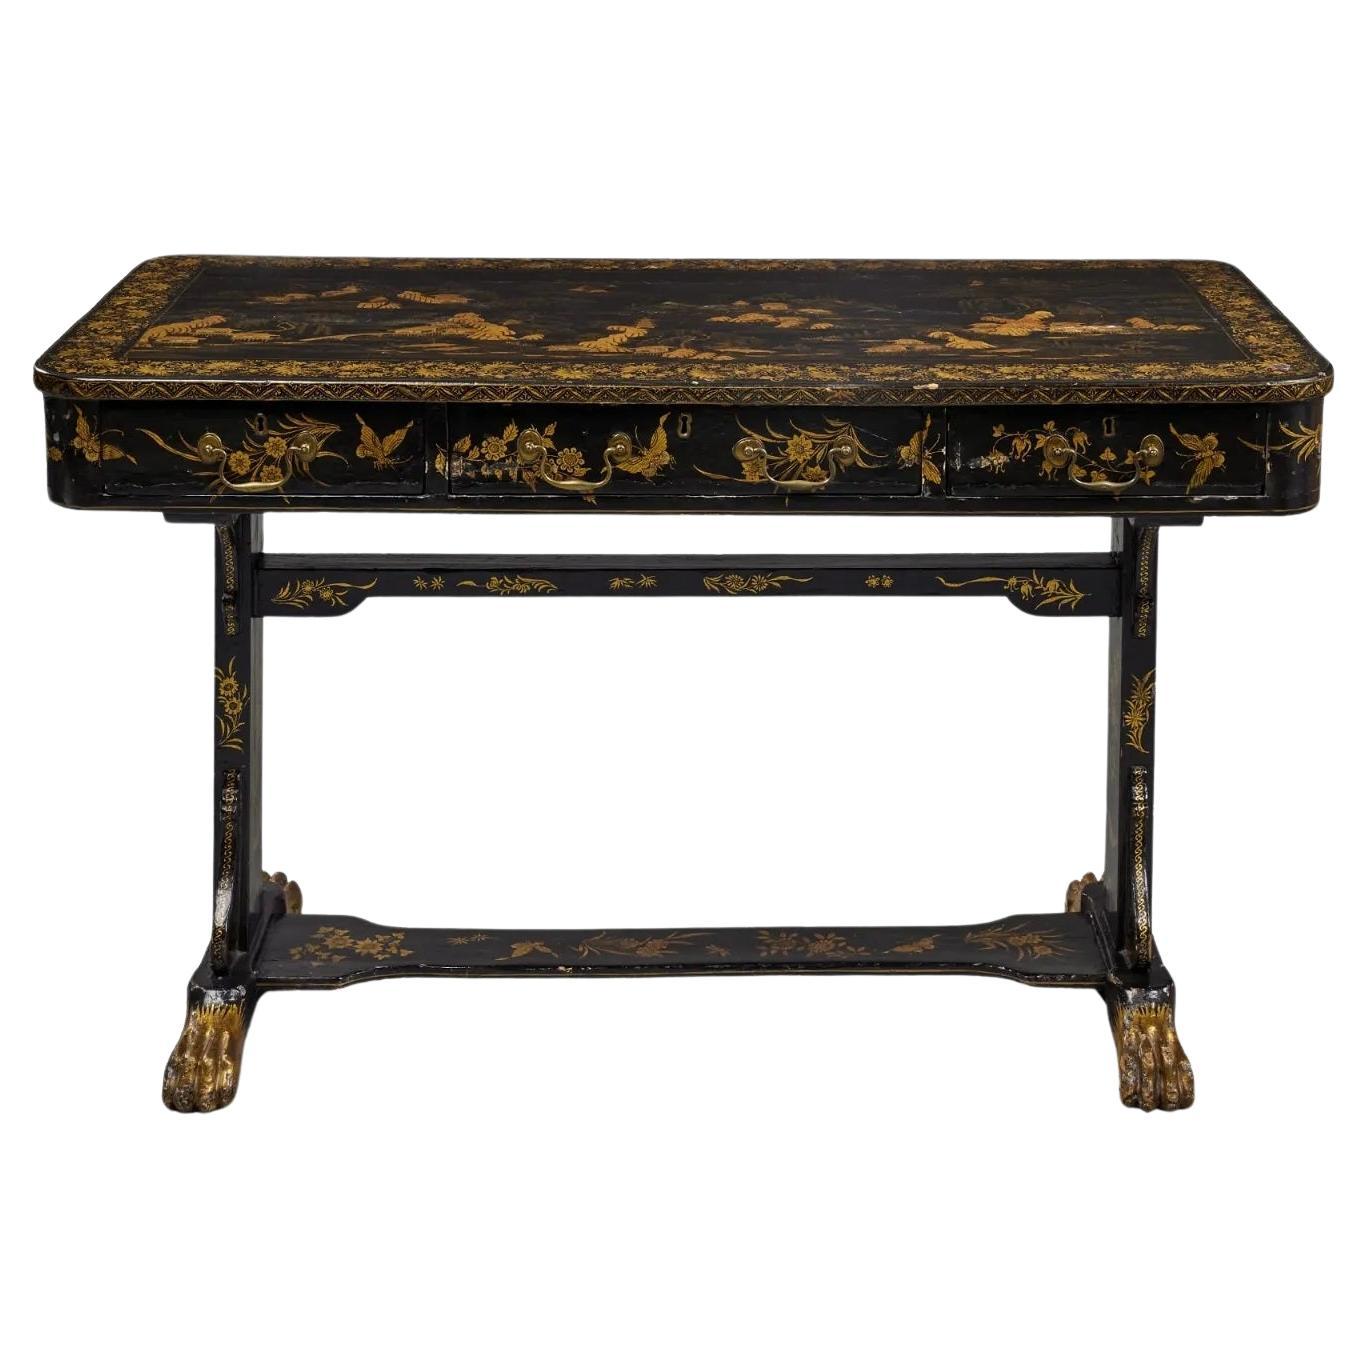 A Chinese Export Black and Gold Lacquer Desk For Sale